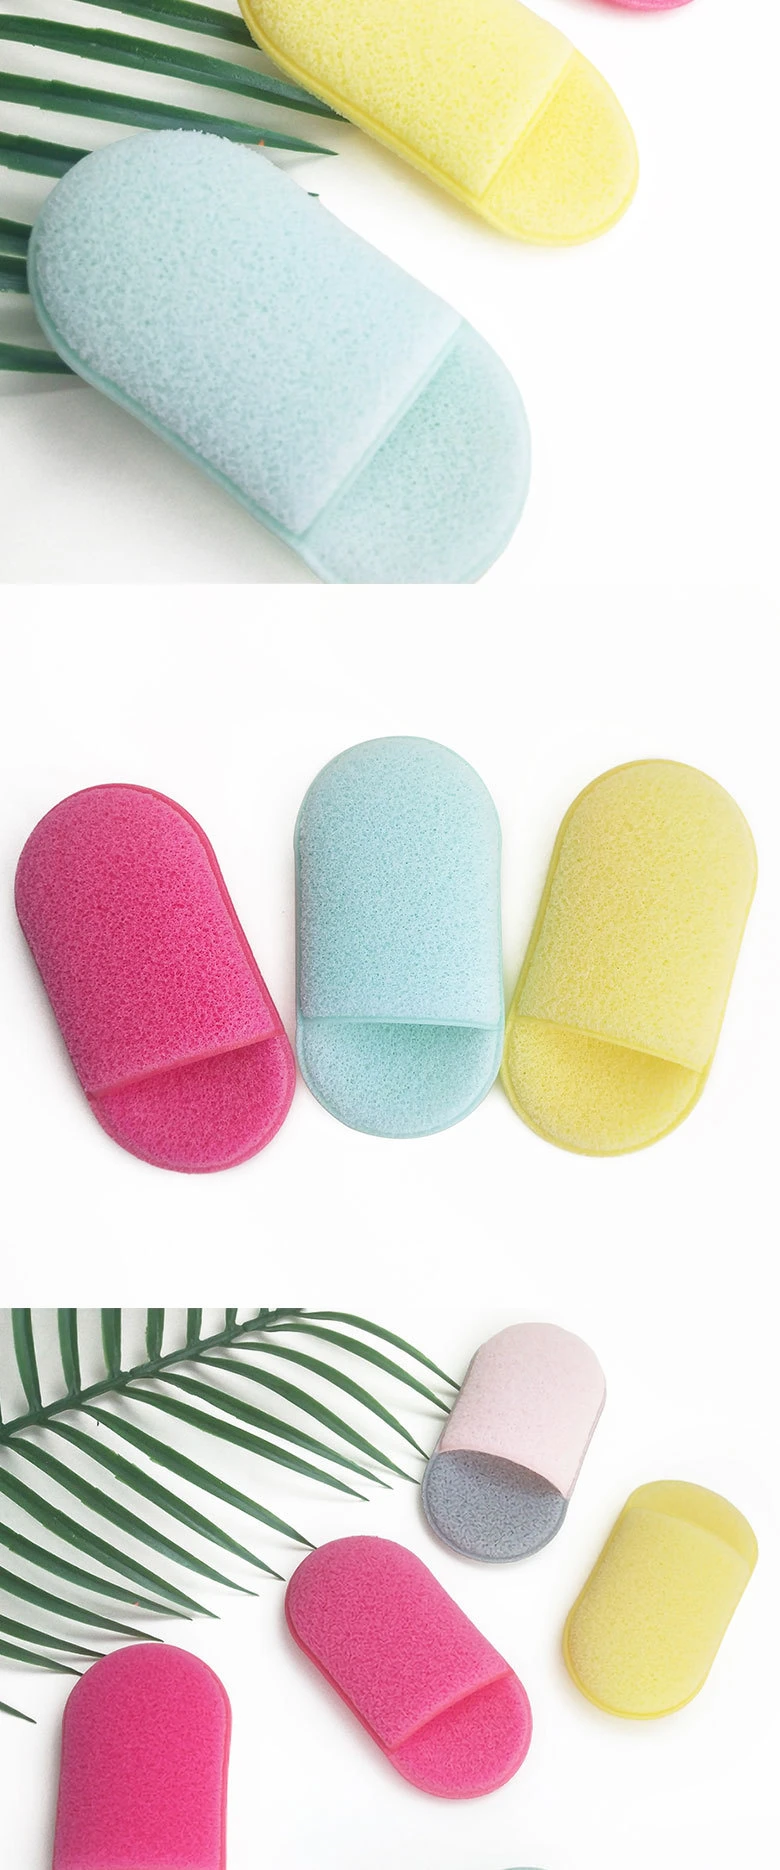 New Arrival Face Washing Foam Sponge Puff Facial Cleanser Face Washing Puff Beauty Cosmetic Makeup Removal Sponge